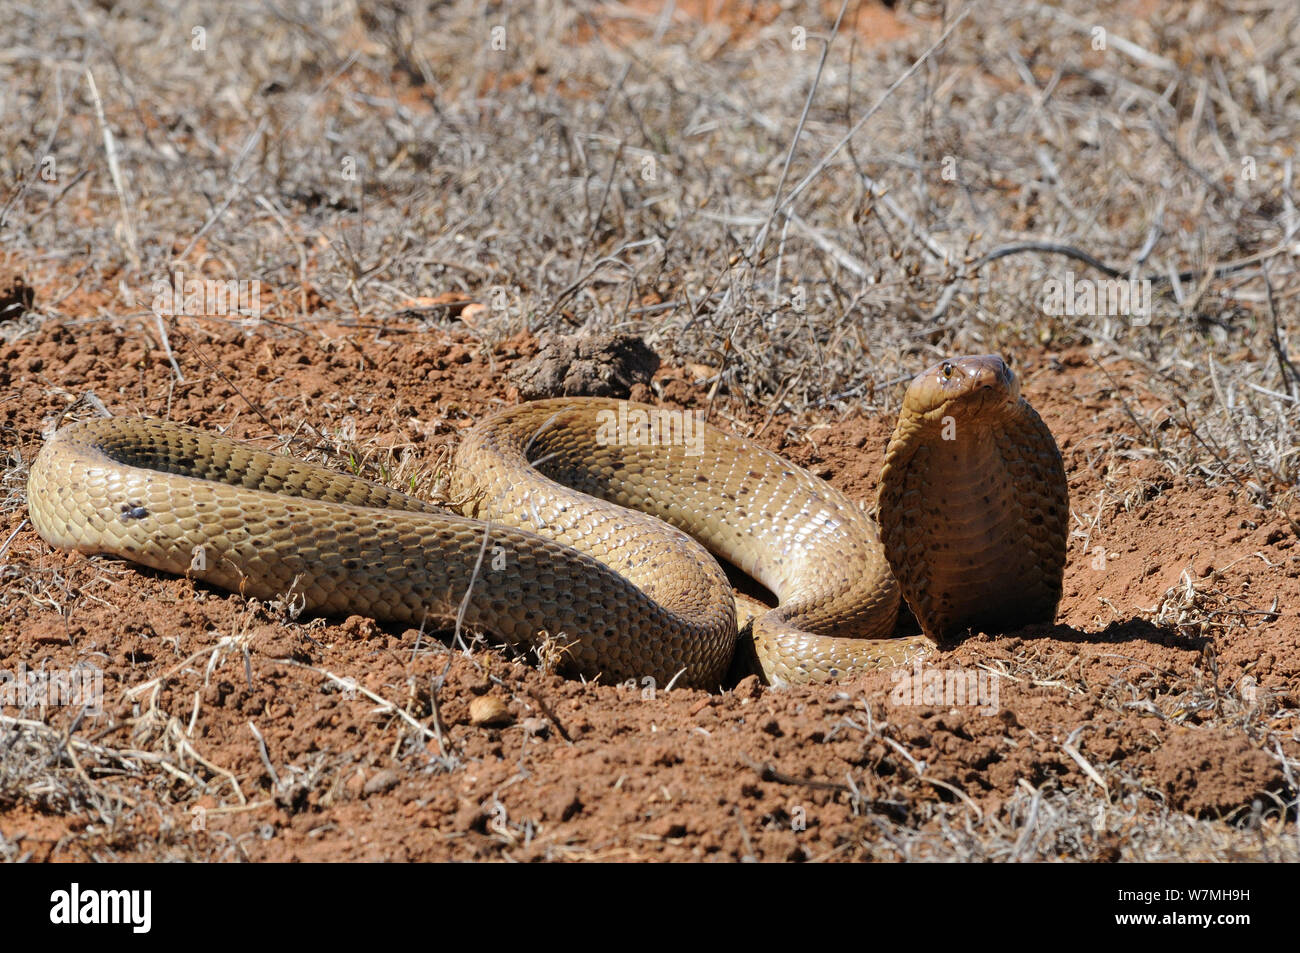 Cape Cobra (Naja nivea) female snake with hood raised in a defensive threat display. deHoop Nature Reserve, Western Cape, South Africa. Stock Photo